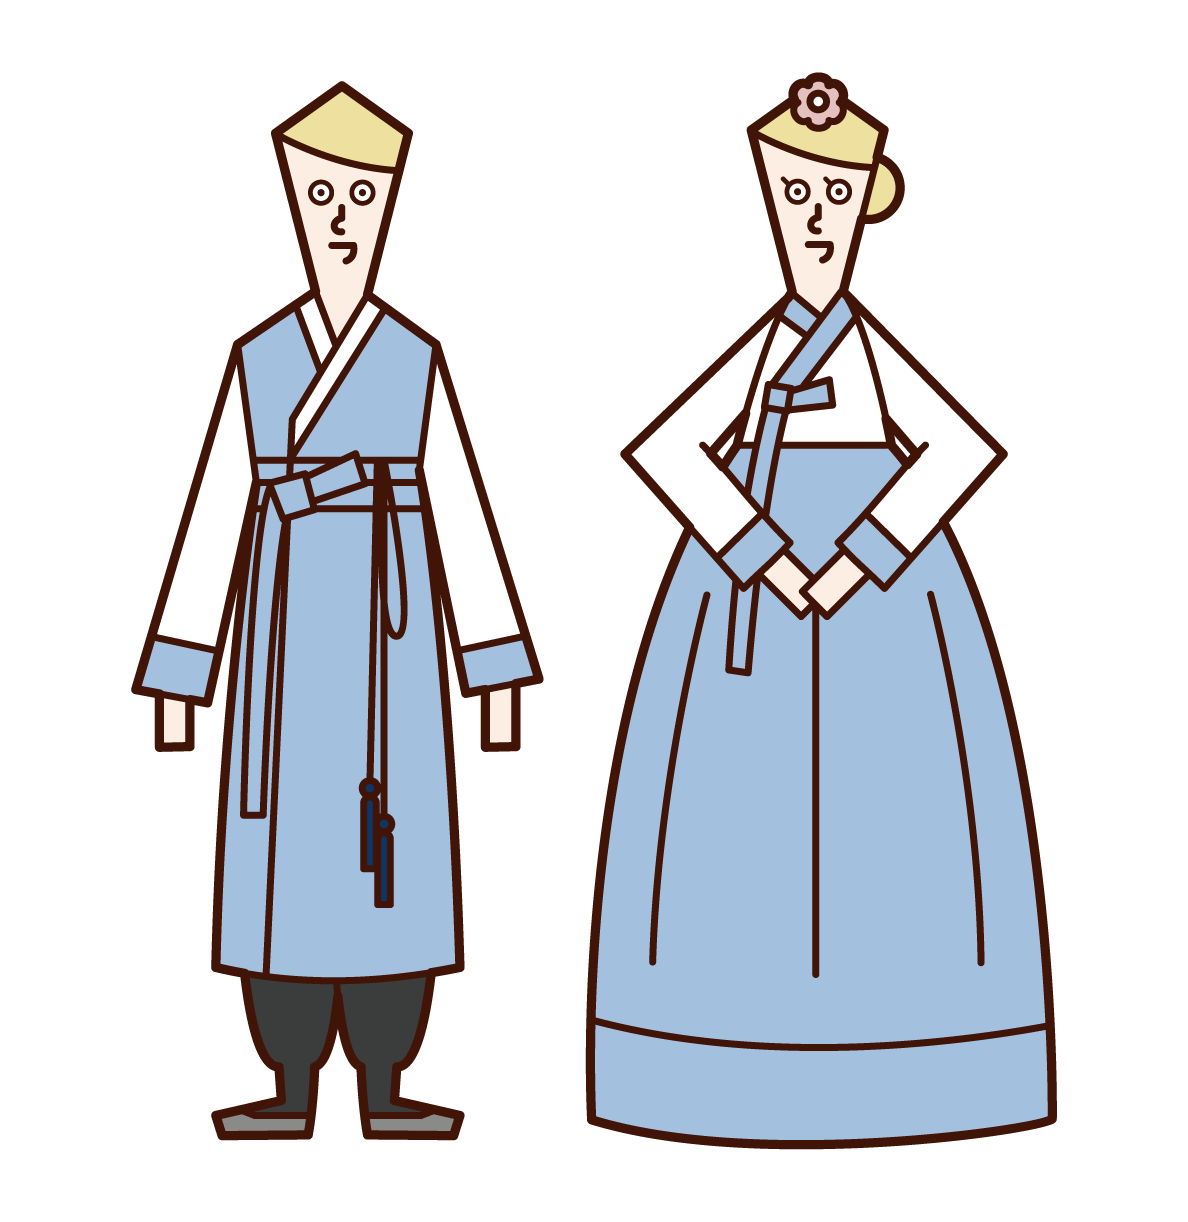 Illustration of a bride and groom (Chimachogori) in Hanbo